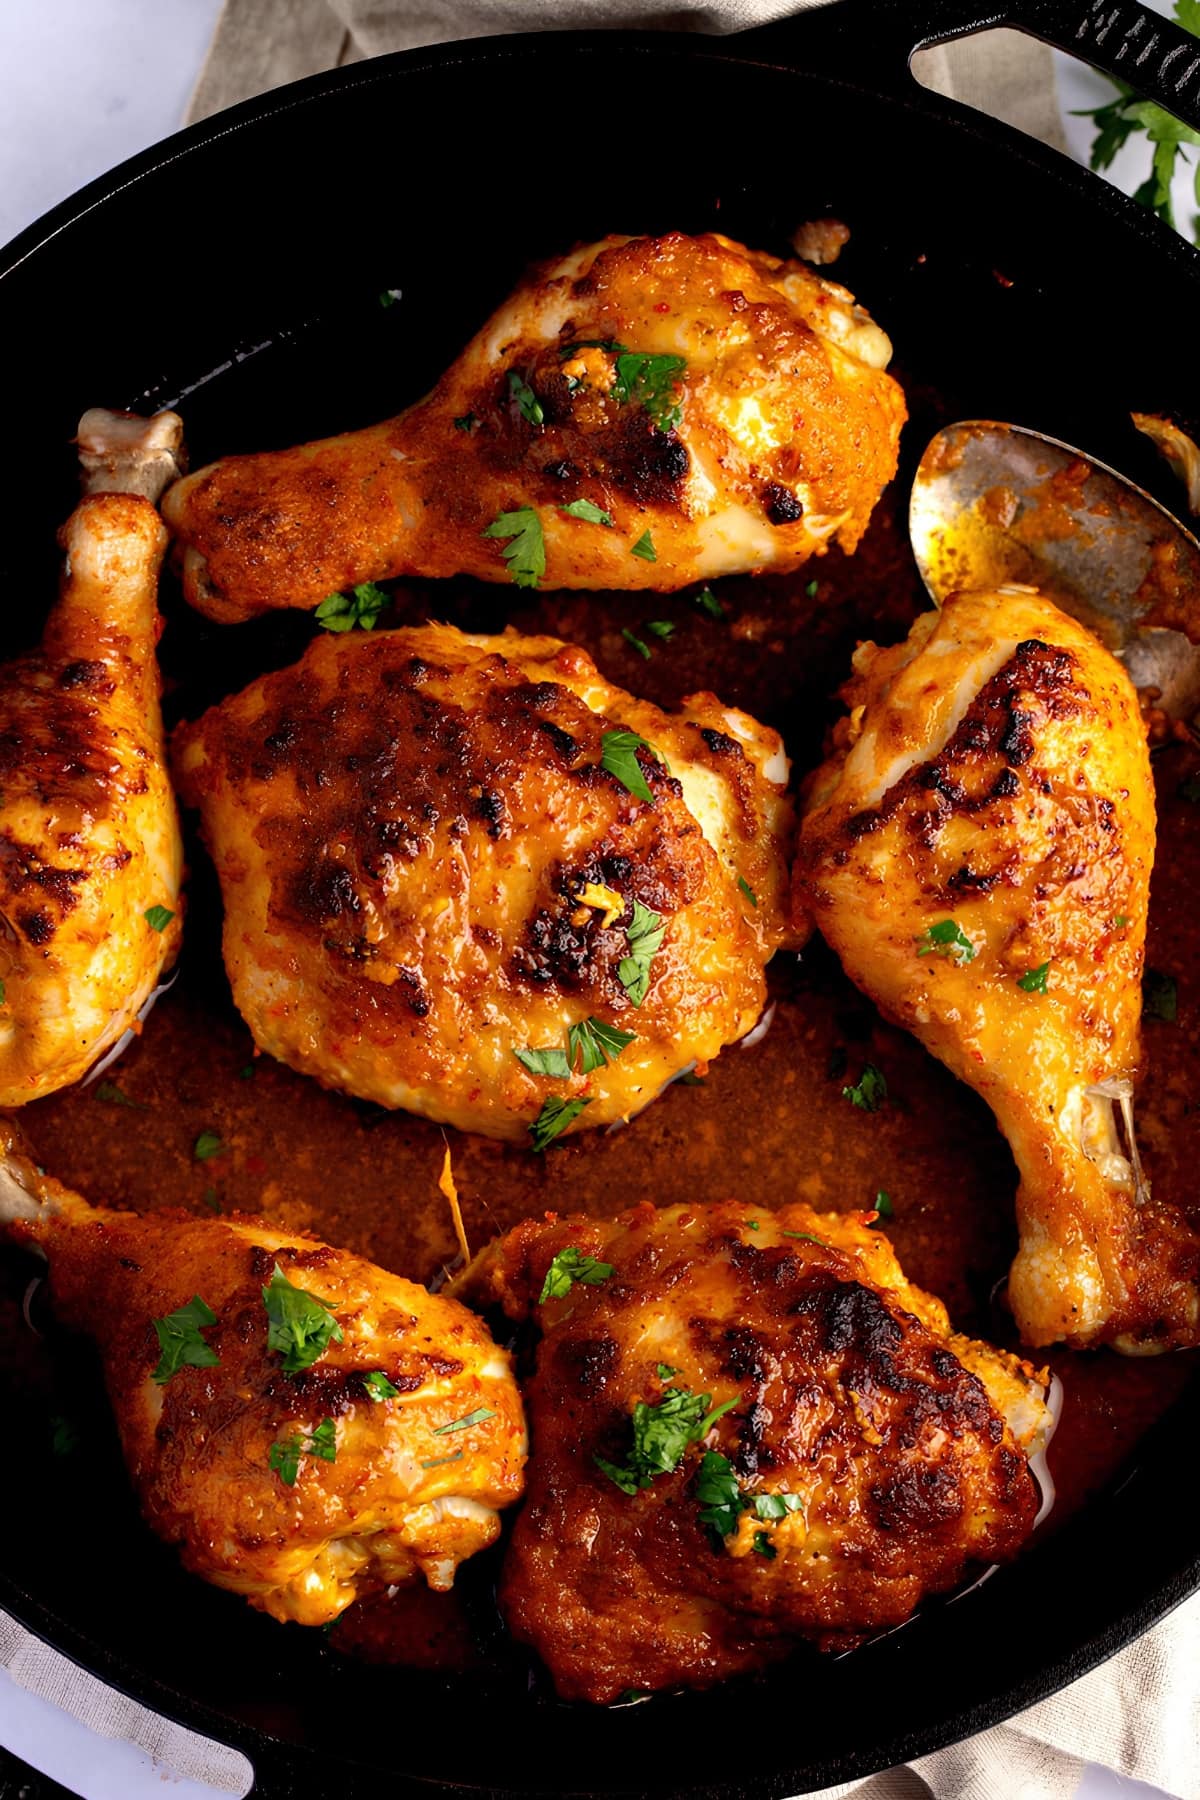 Chicken Peri-peri cooked in a skillet with sauce and herbs.